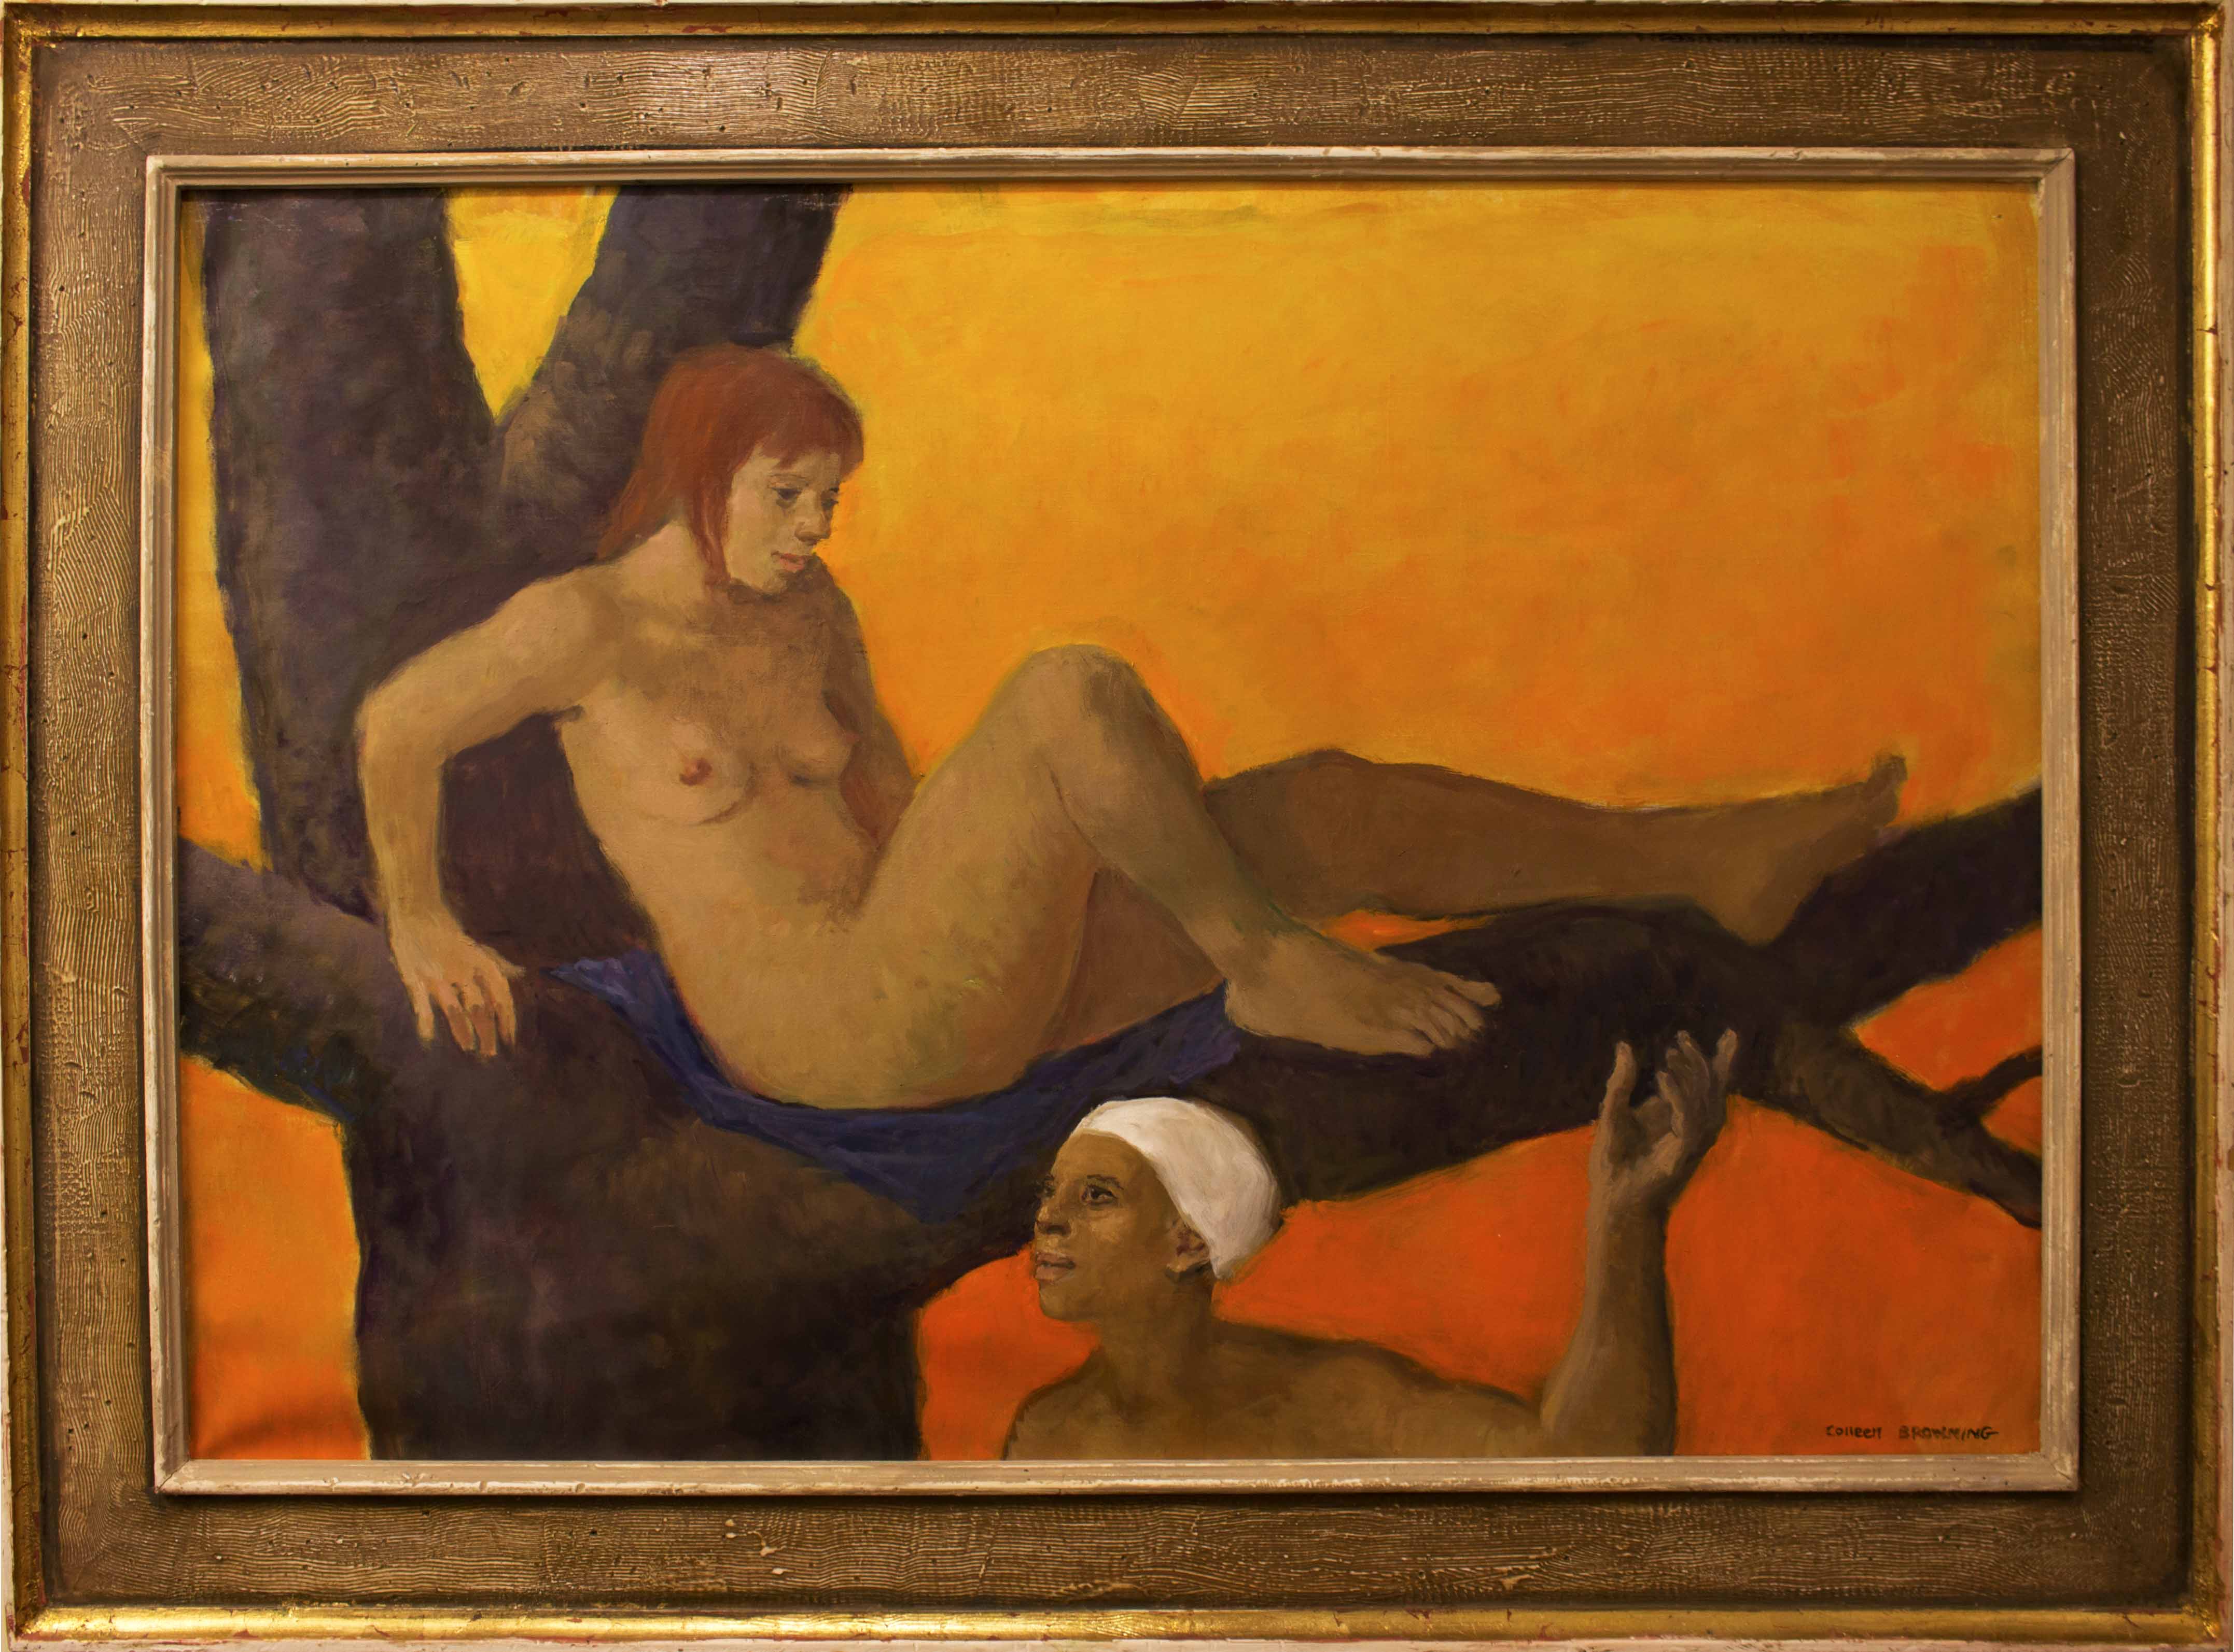 A painting of two nude figures, one of which is sitting on a blue cloth on a tree branch and the other is below looking up. The background behind the tree and figures is a bright orange and yellow gradation. 